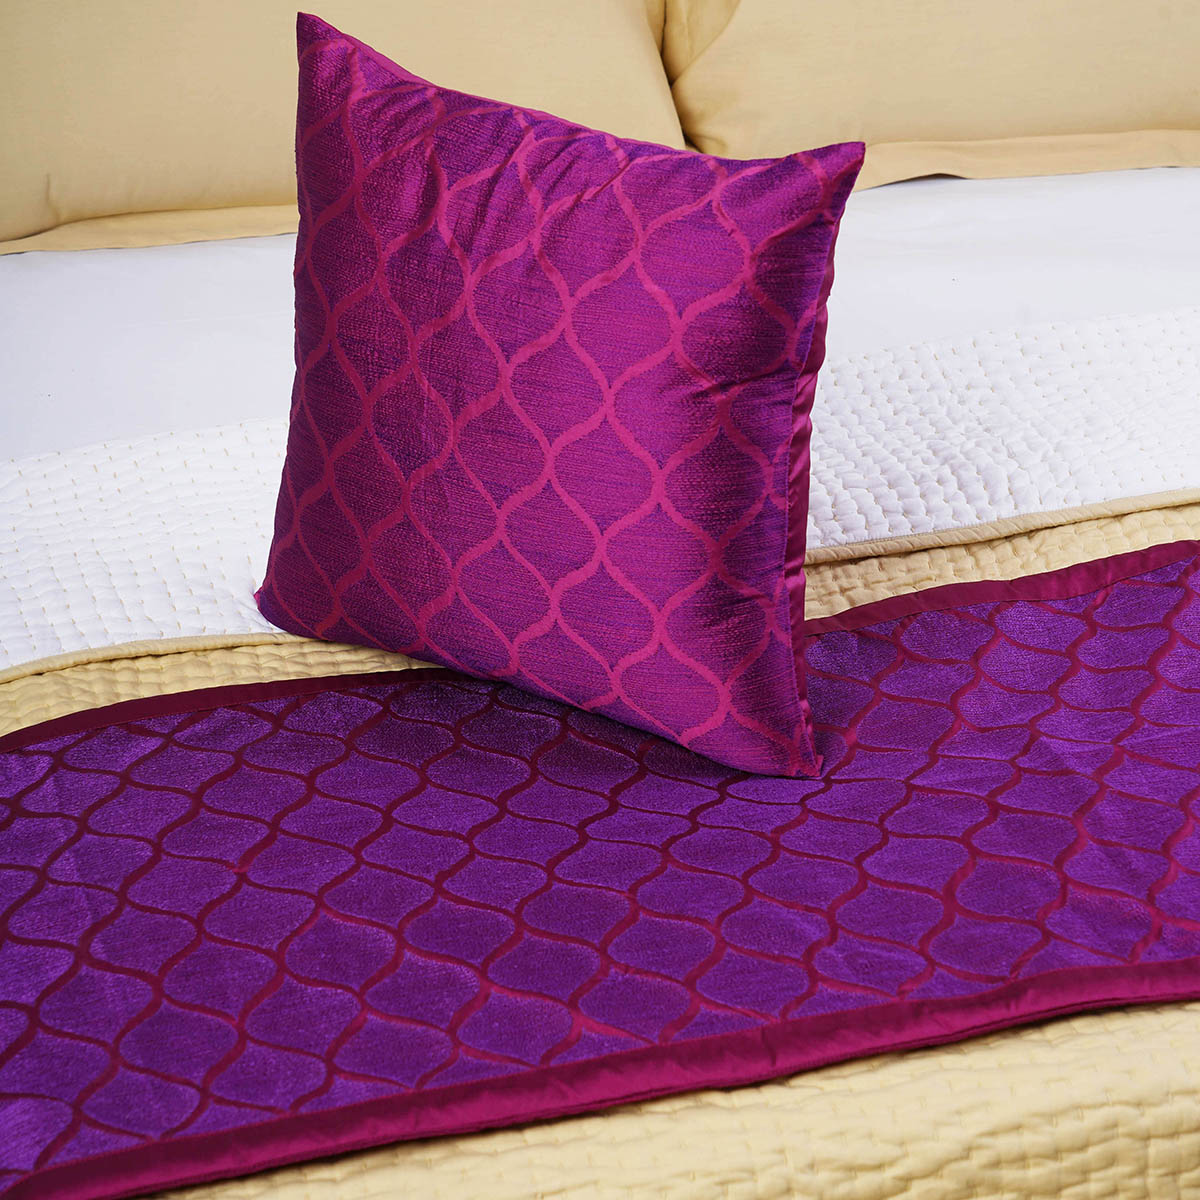 Plum fully embroidered Bed runner set - King / Queen / Twin Size Bed Runner with coordinated Decorative Throw Pillow Cover